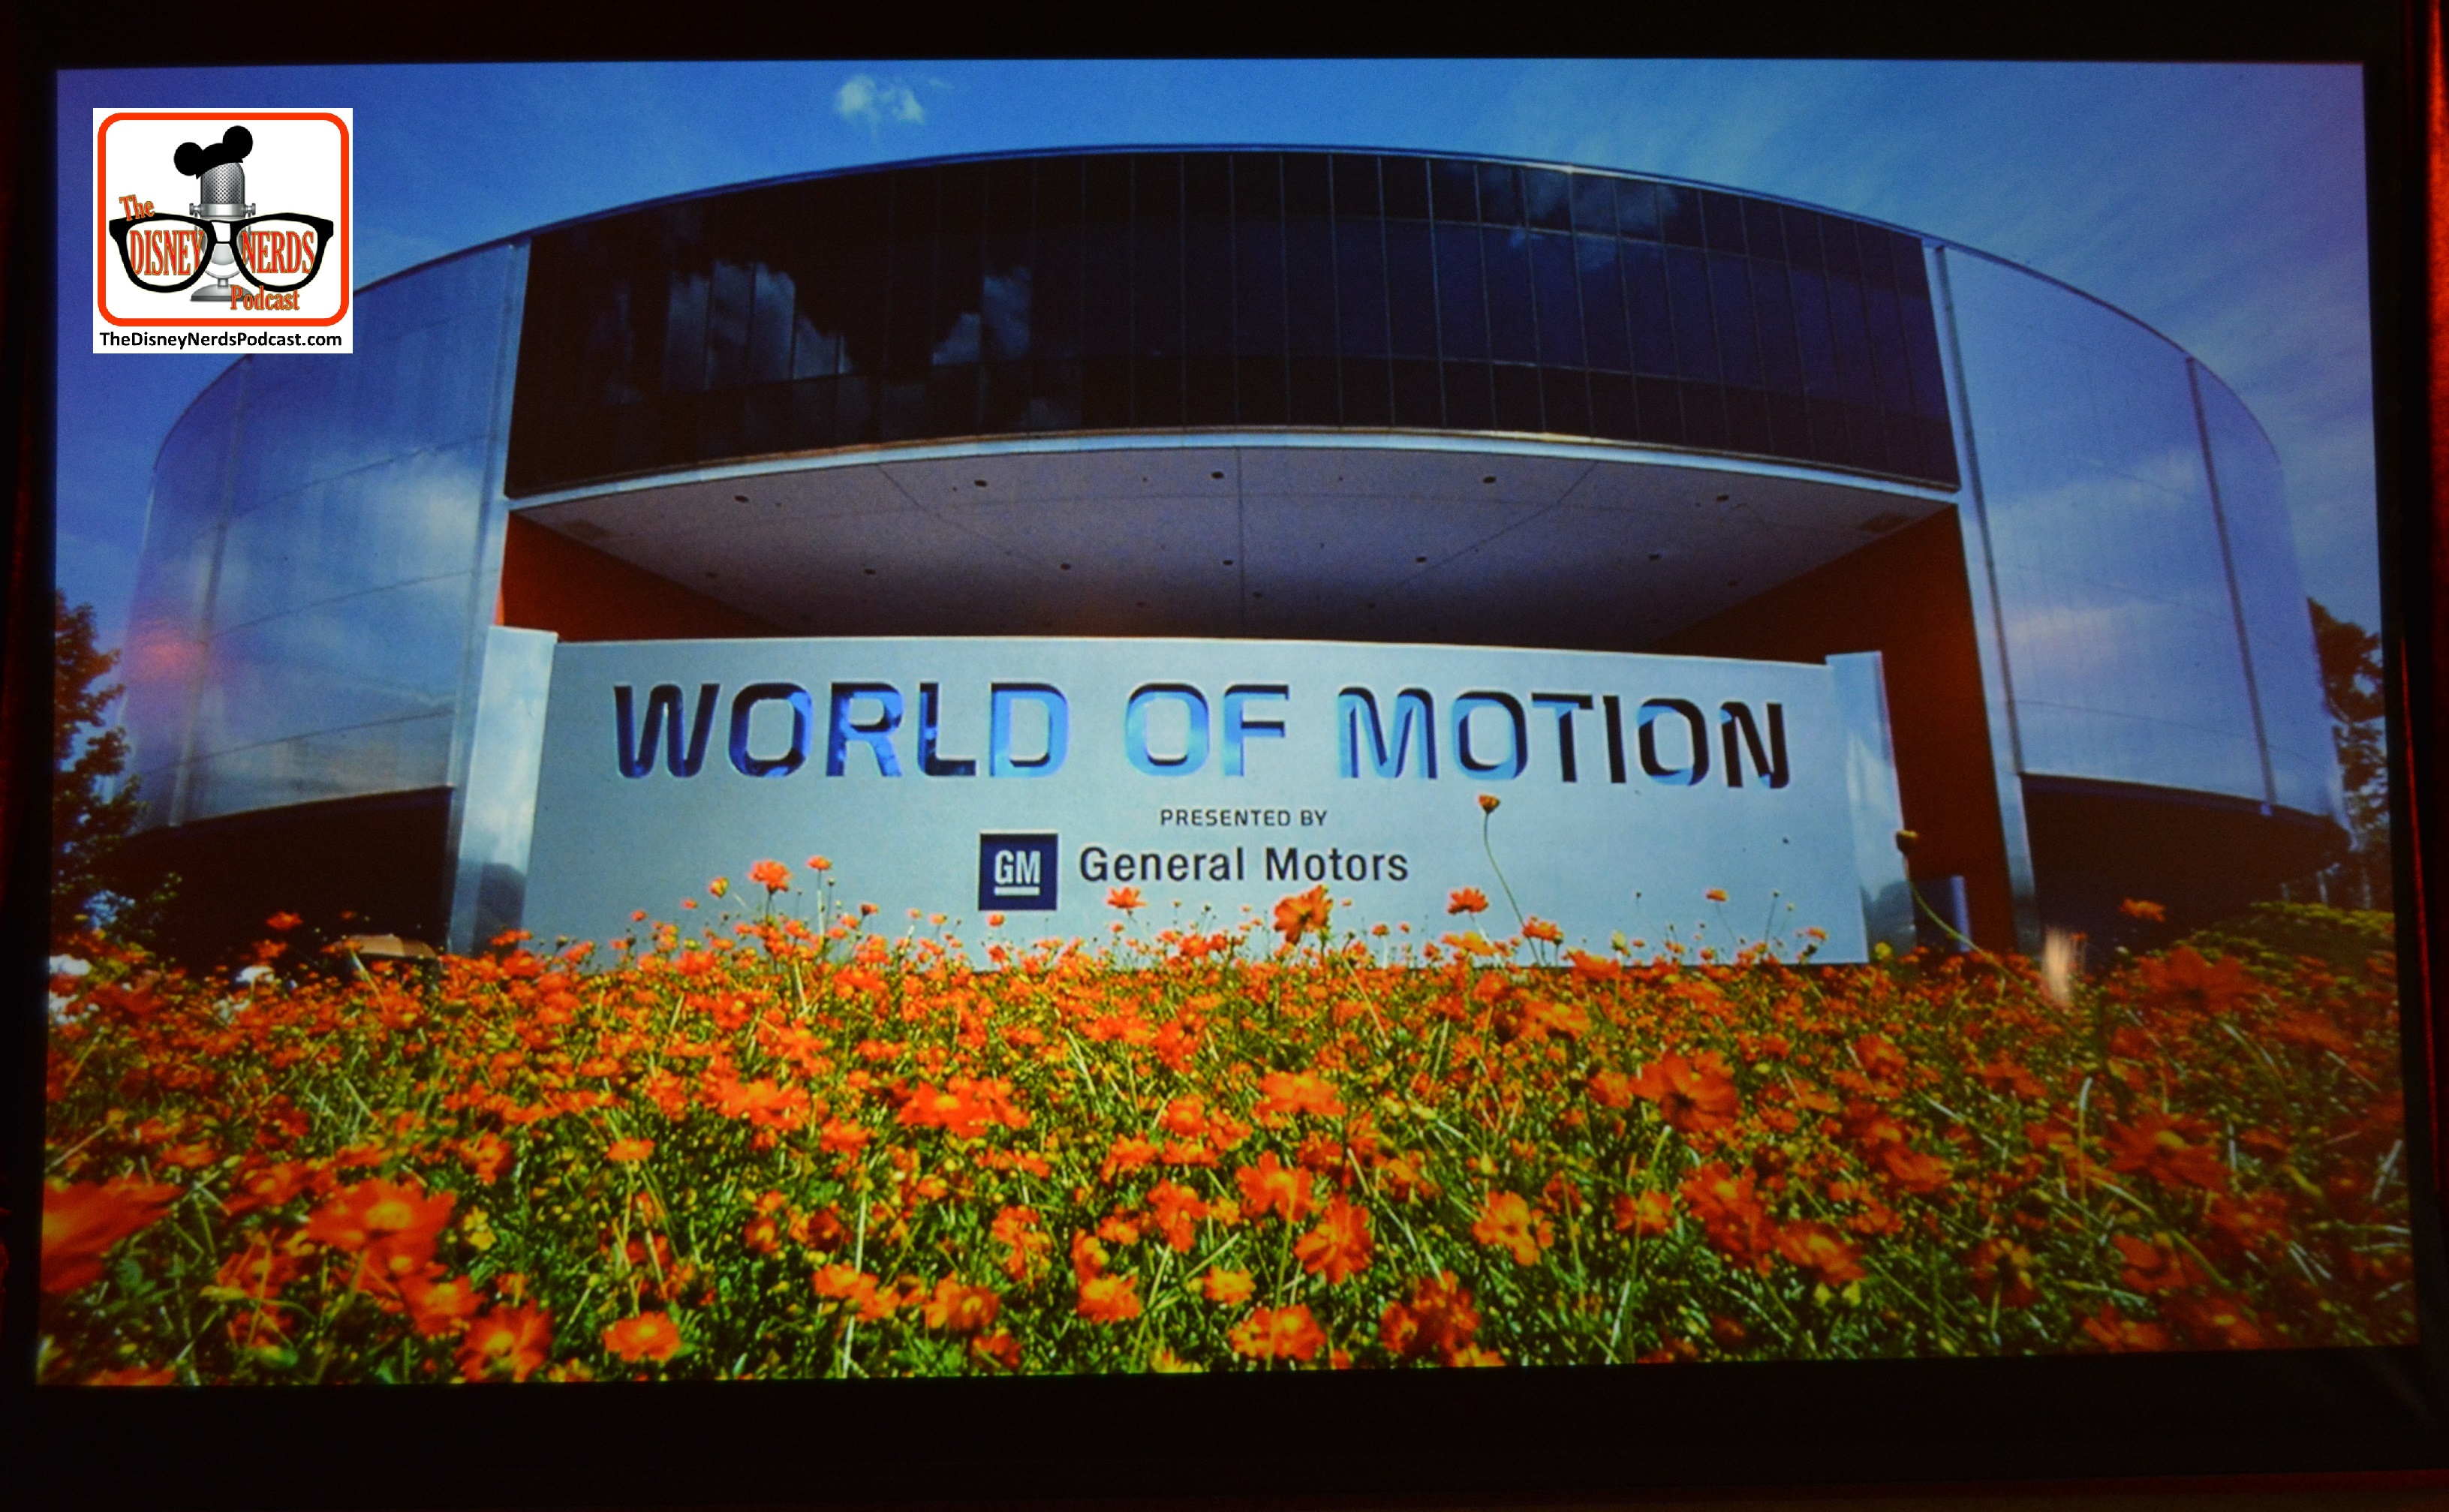 Epcot Legacy Showplace - World of Motion - From the Epcot History Slide Show #Epcot35